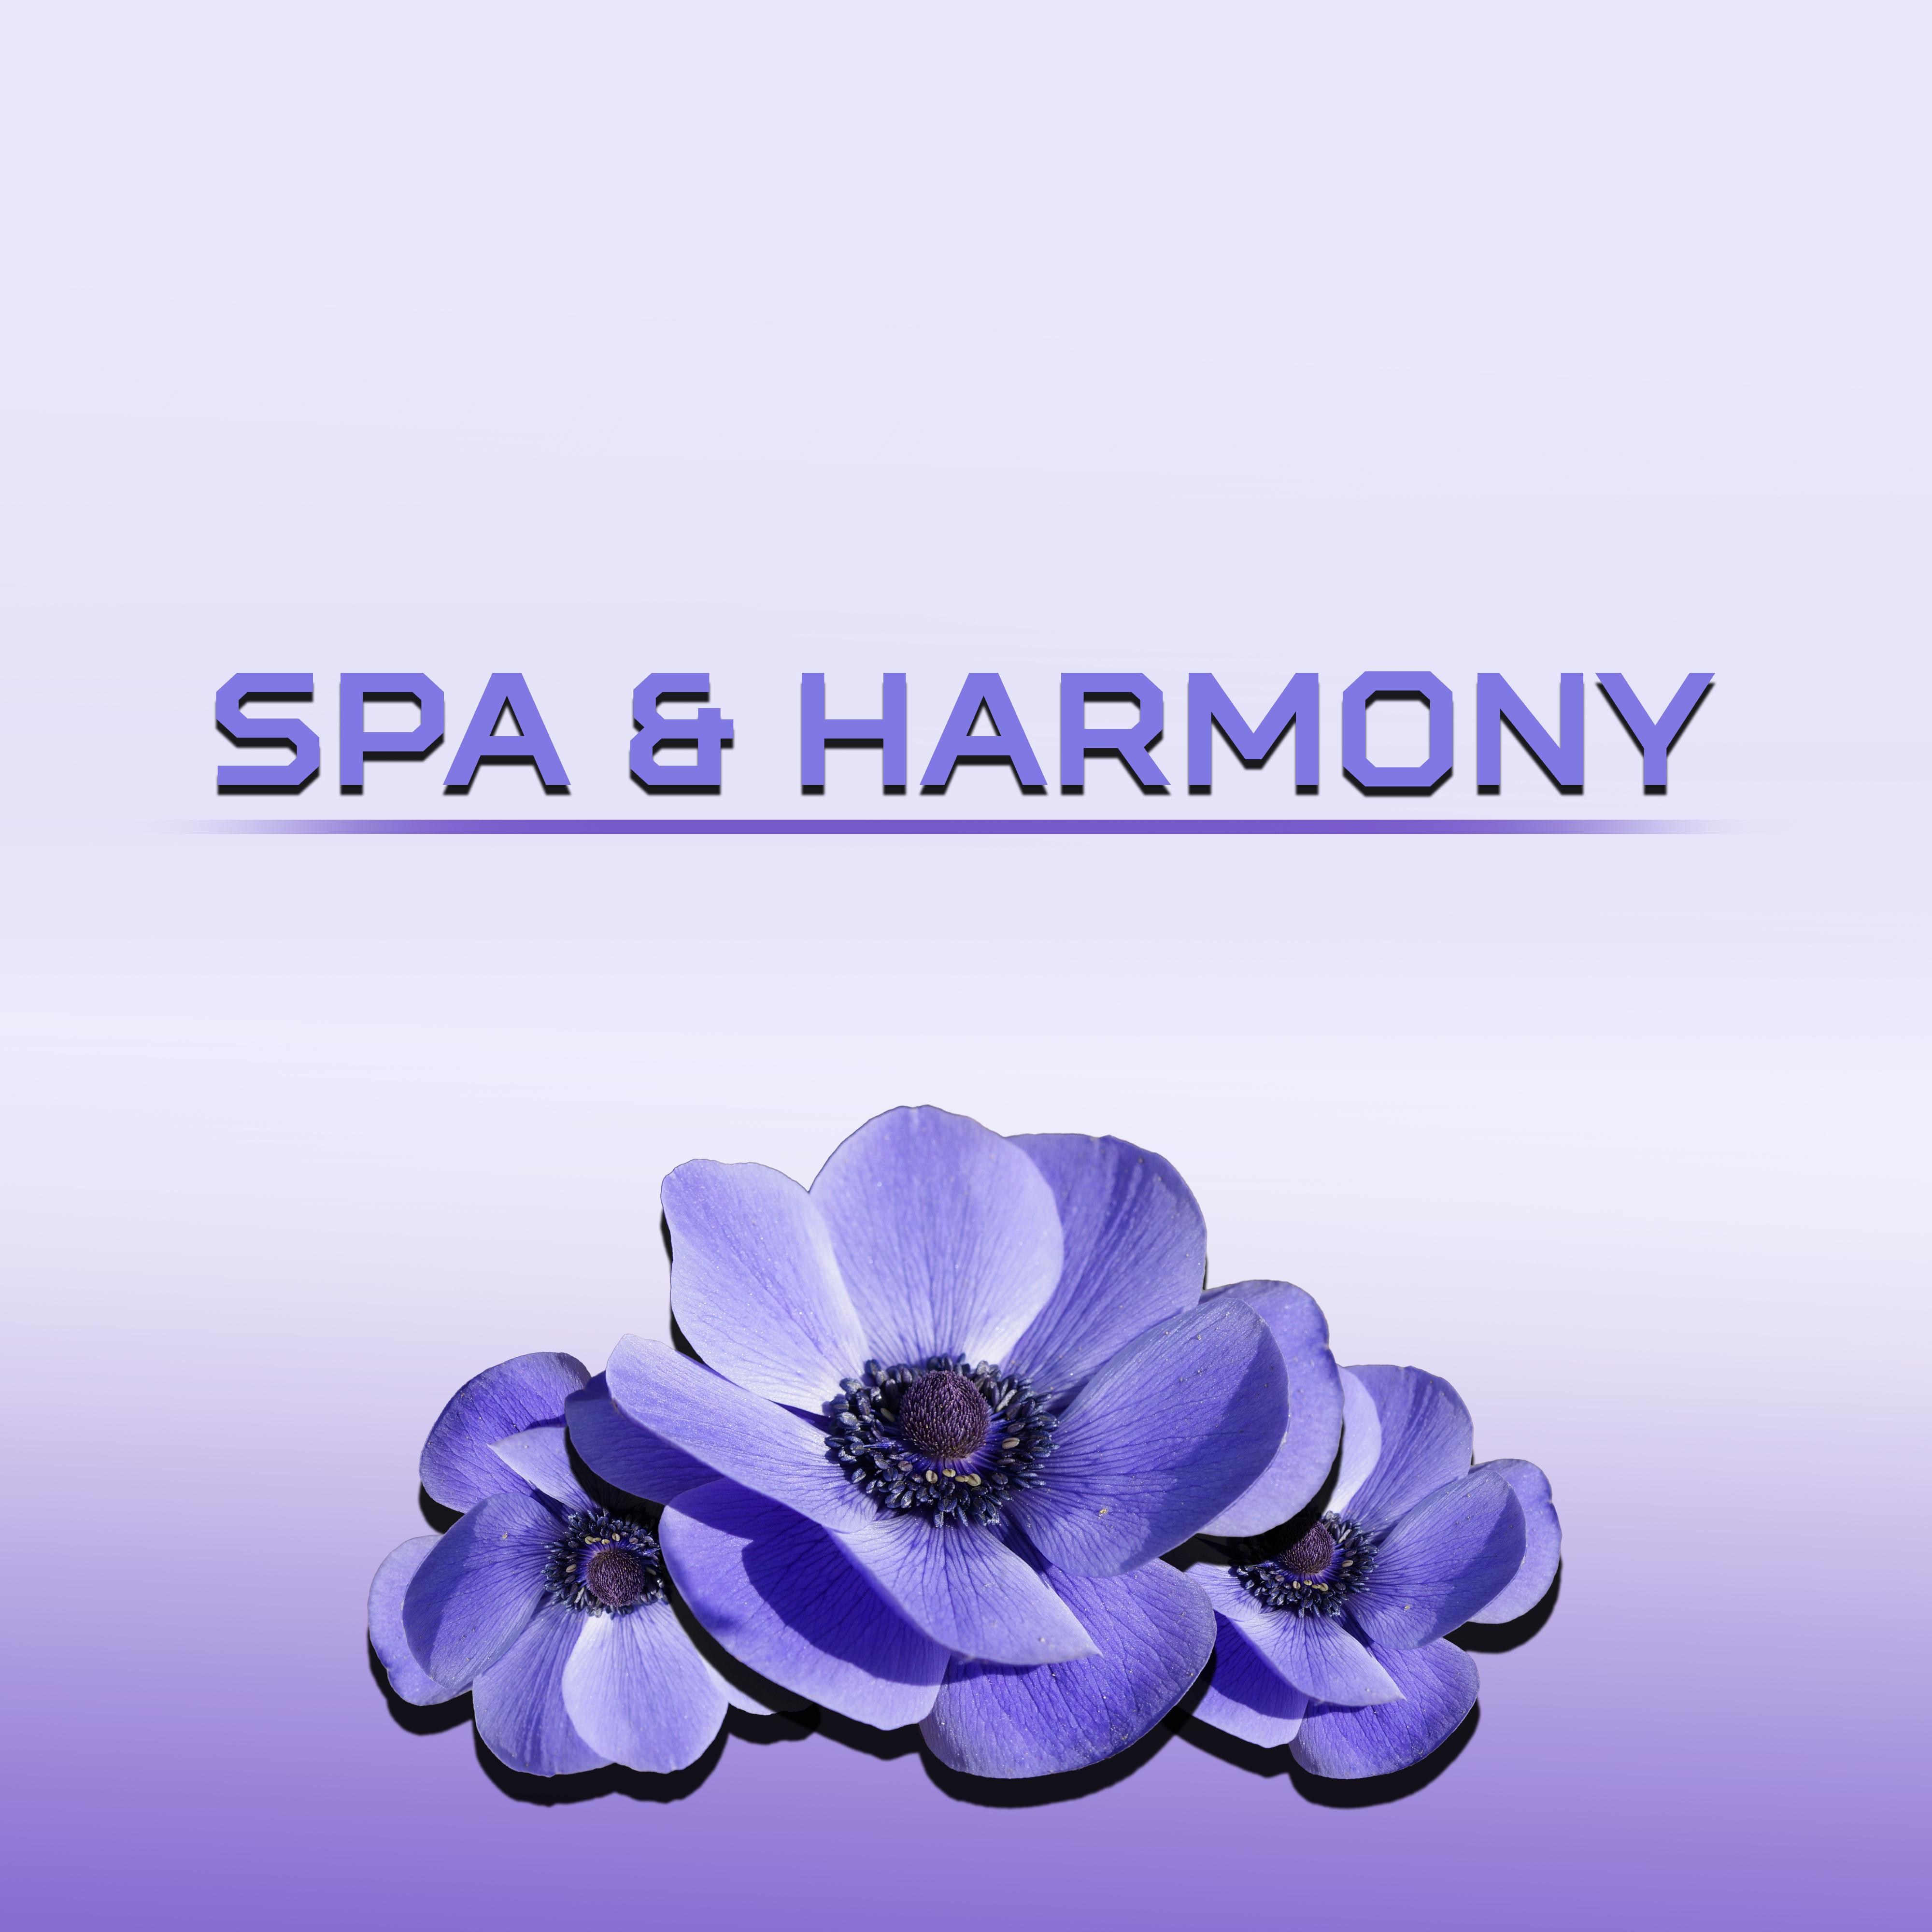 Spa & Harmony – Soft Music for Massage, Spa, Wellness, Nature Sounds for Relaxation, Zen Garden, Spa Dreams, Peaceful Mind